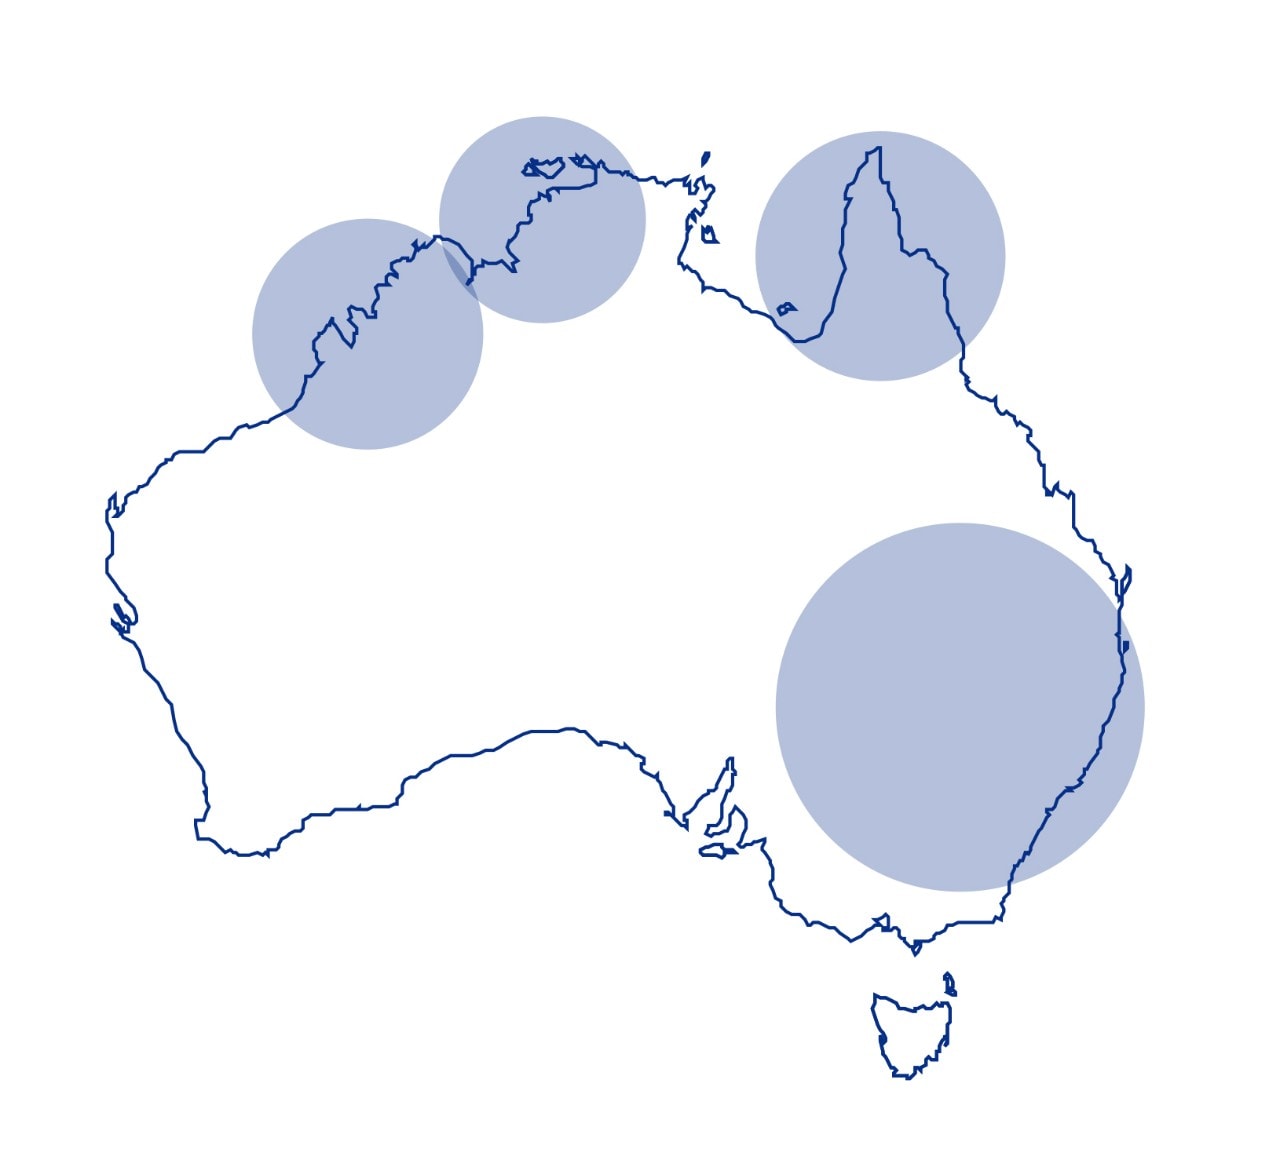 Map of Australia with certain regions highlighted